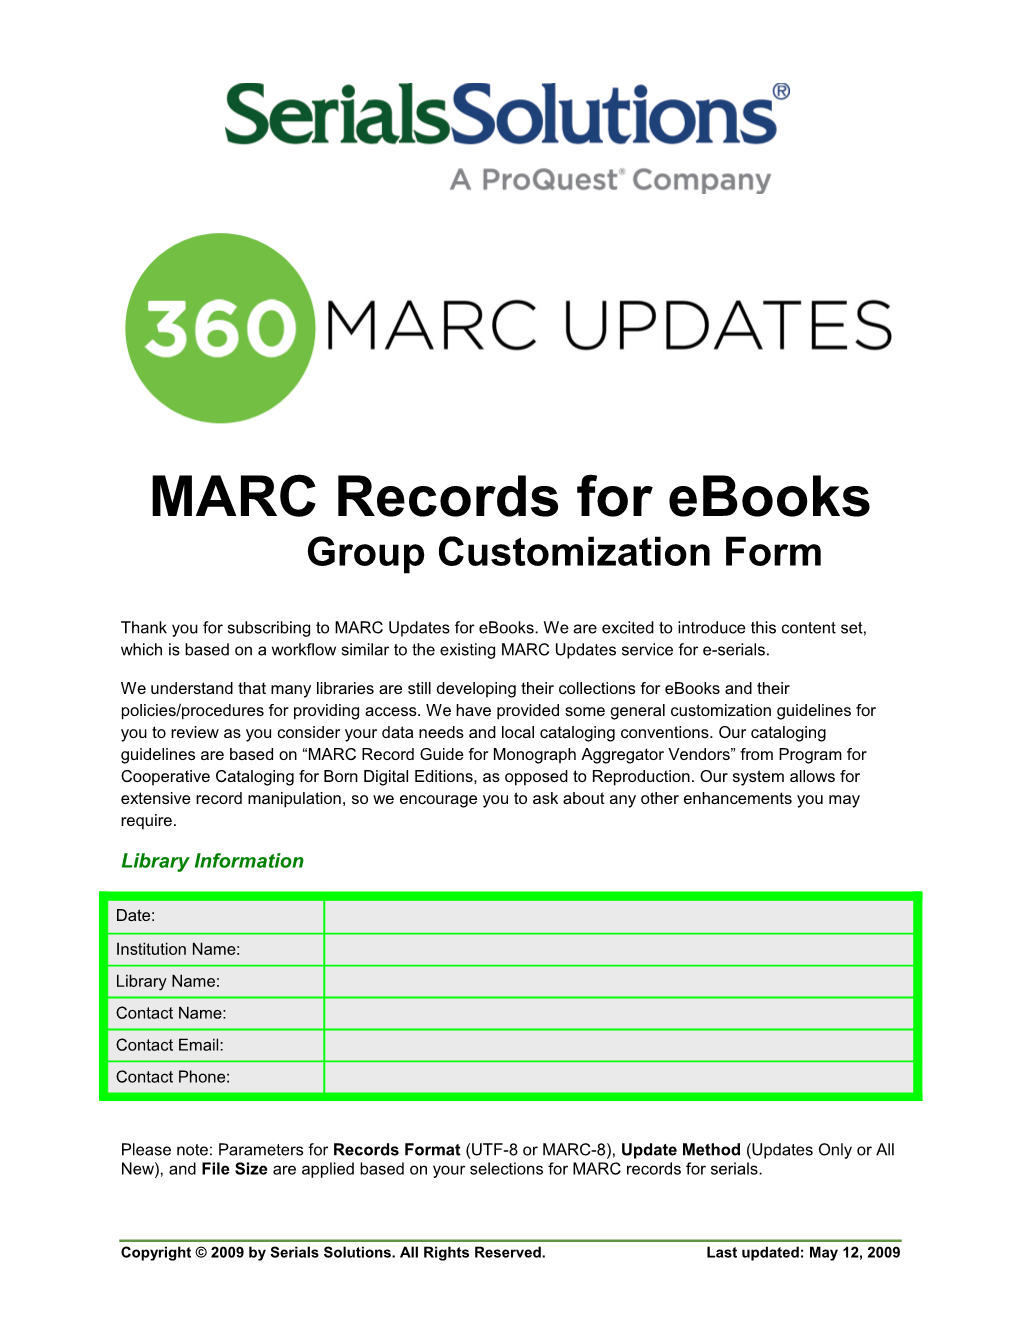 MARC Records for Ebooks Group Customization Form